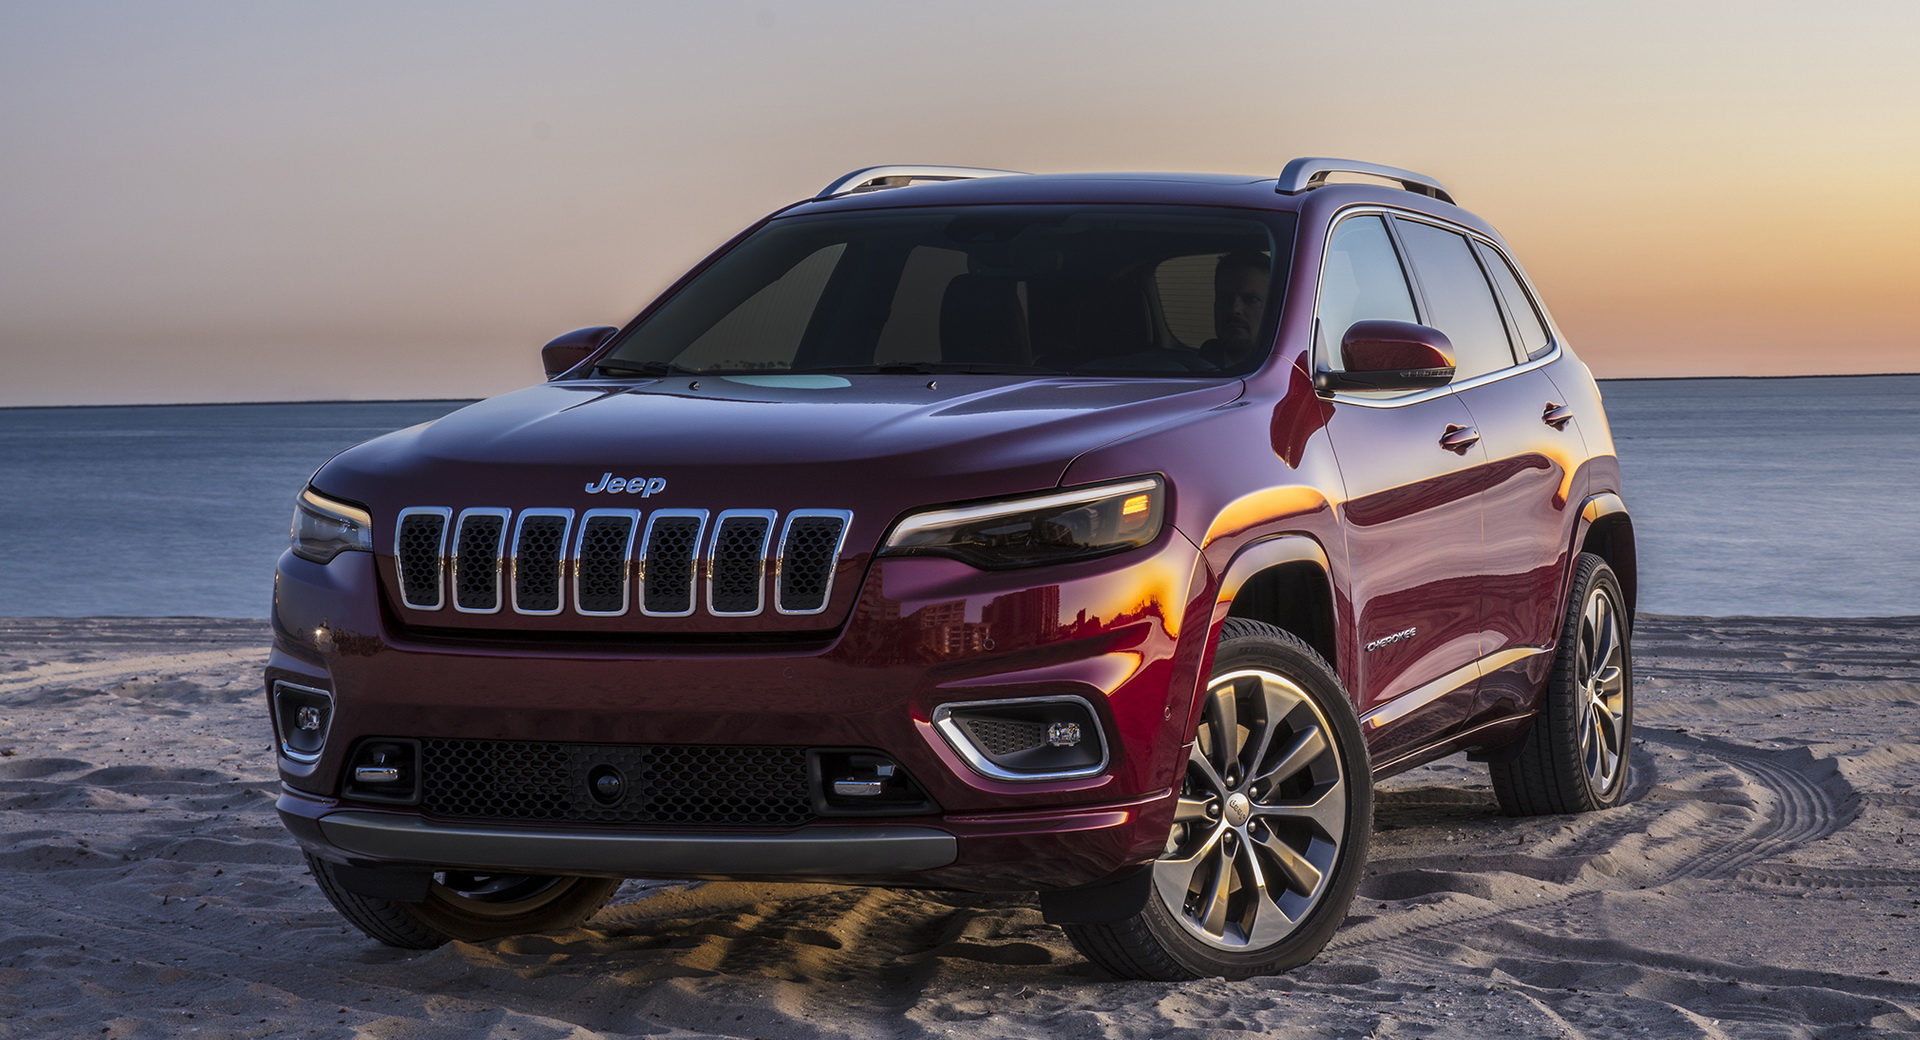 2021 Jeep Cherokee Loses Its Top-Spec Overland Trim Level